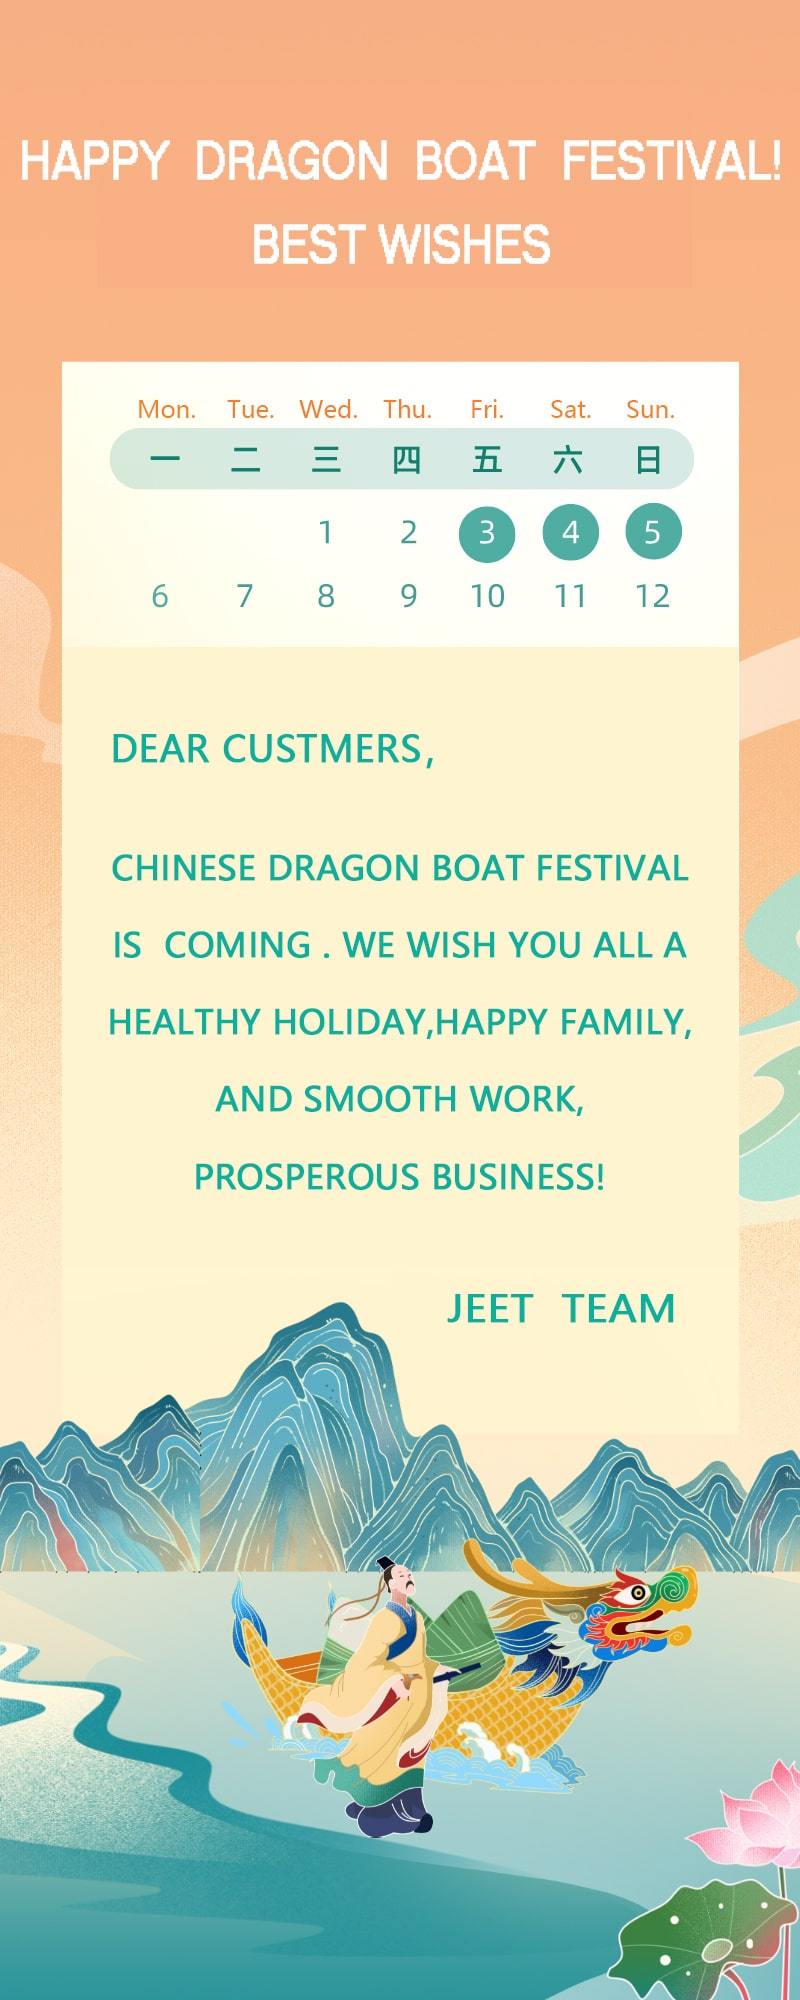 HAPPY DRAGON BOAT FESTIVAL BEST WISHES